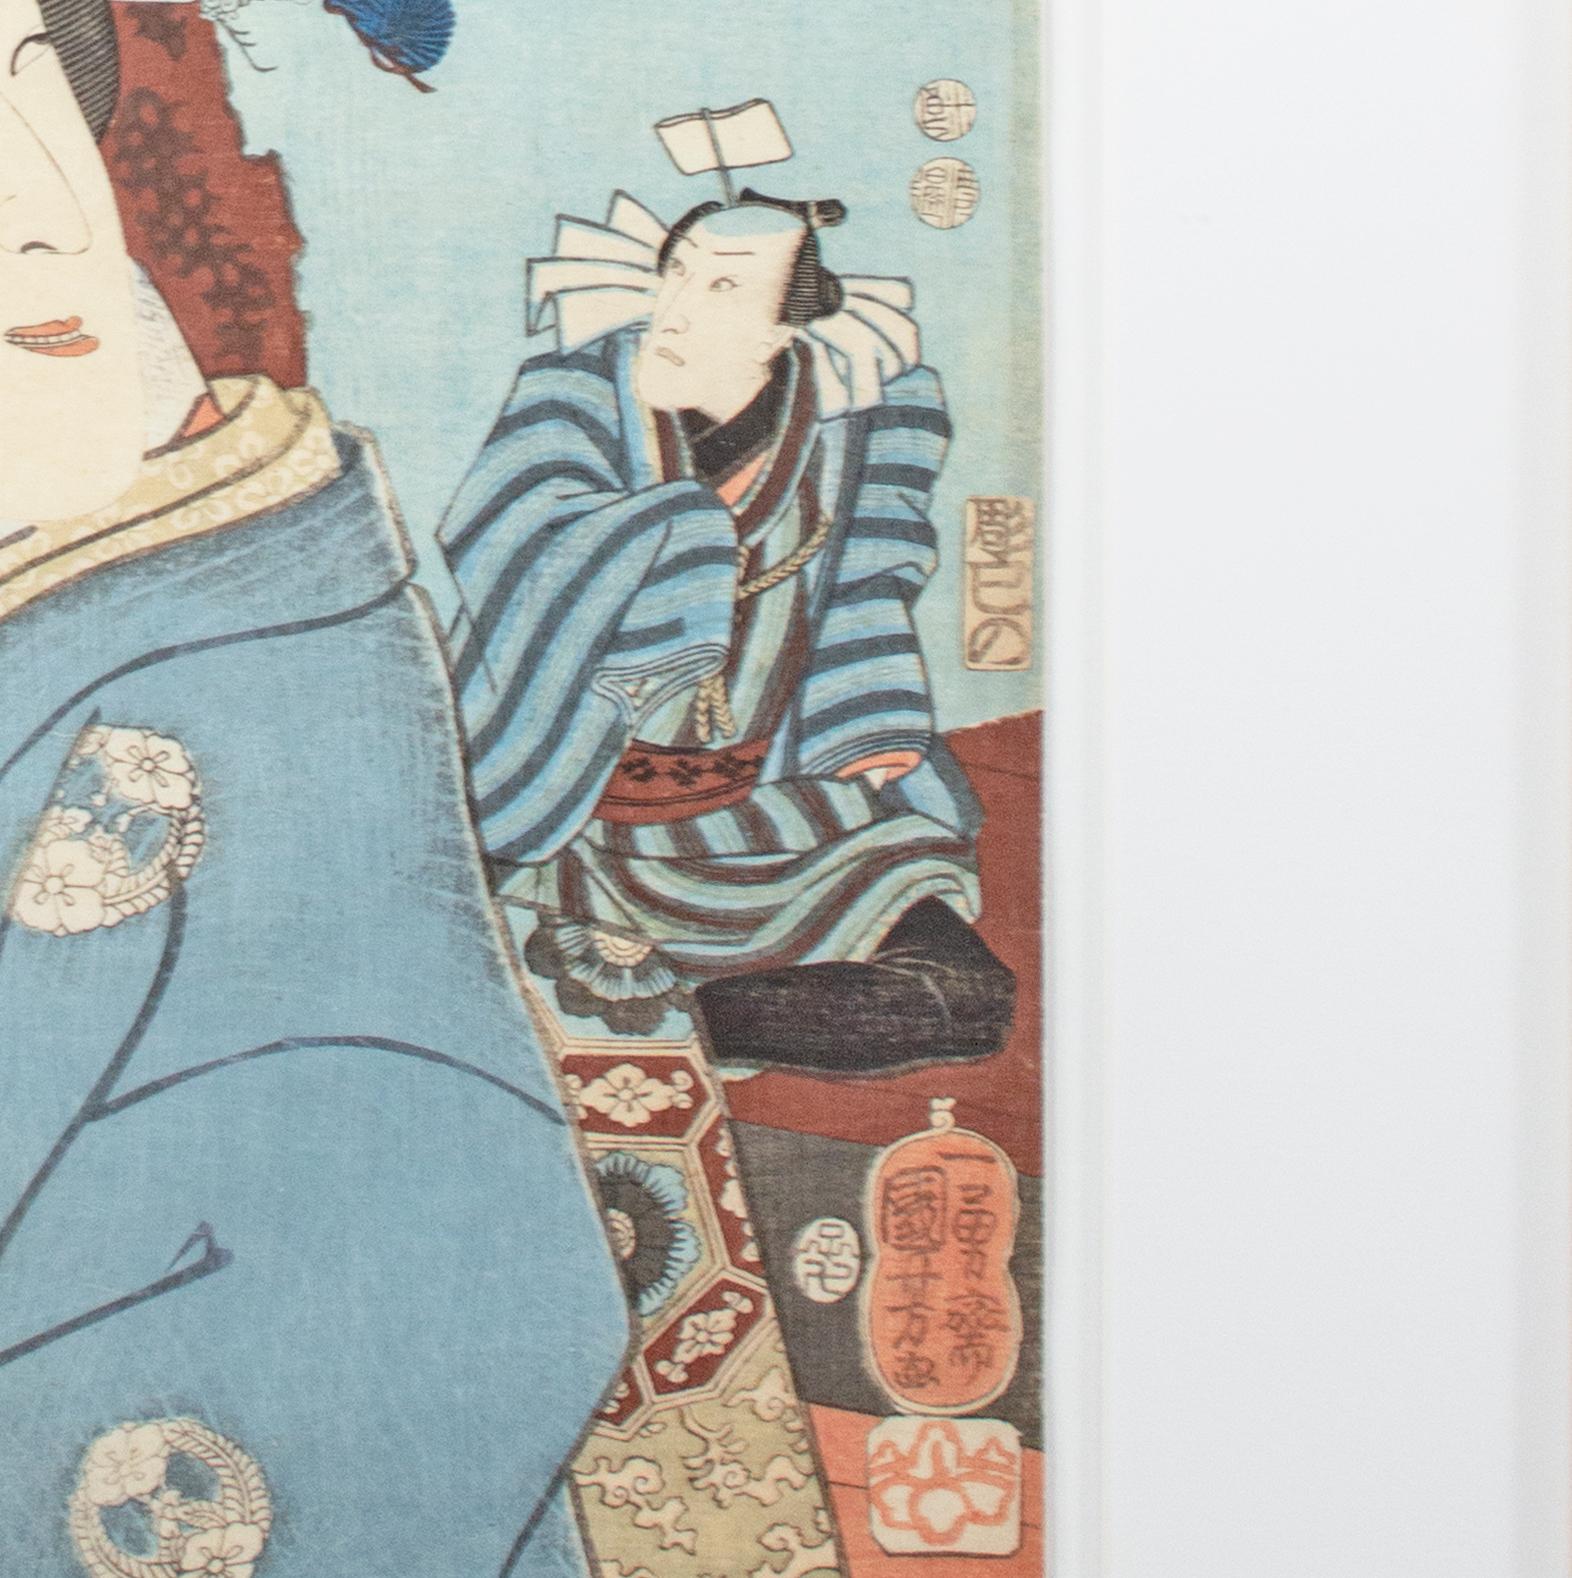 This print is from a highly regarded series by the Edo woodblock artist Utagawa Kuniyoshi: in the period, there were at times prohibitions in depicting actors in the woodblock format. To avoid the censors, artists like Kuniyoshi here would show the